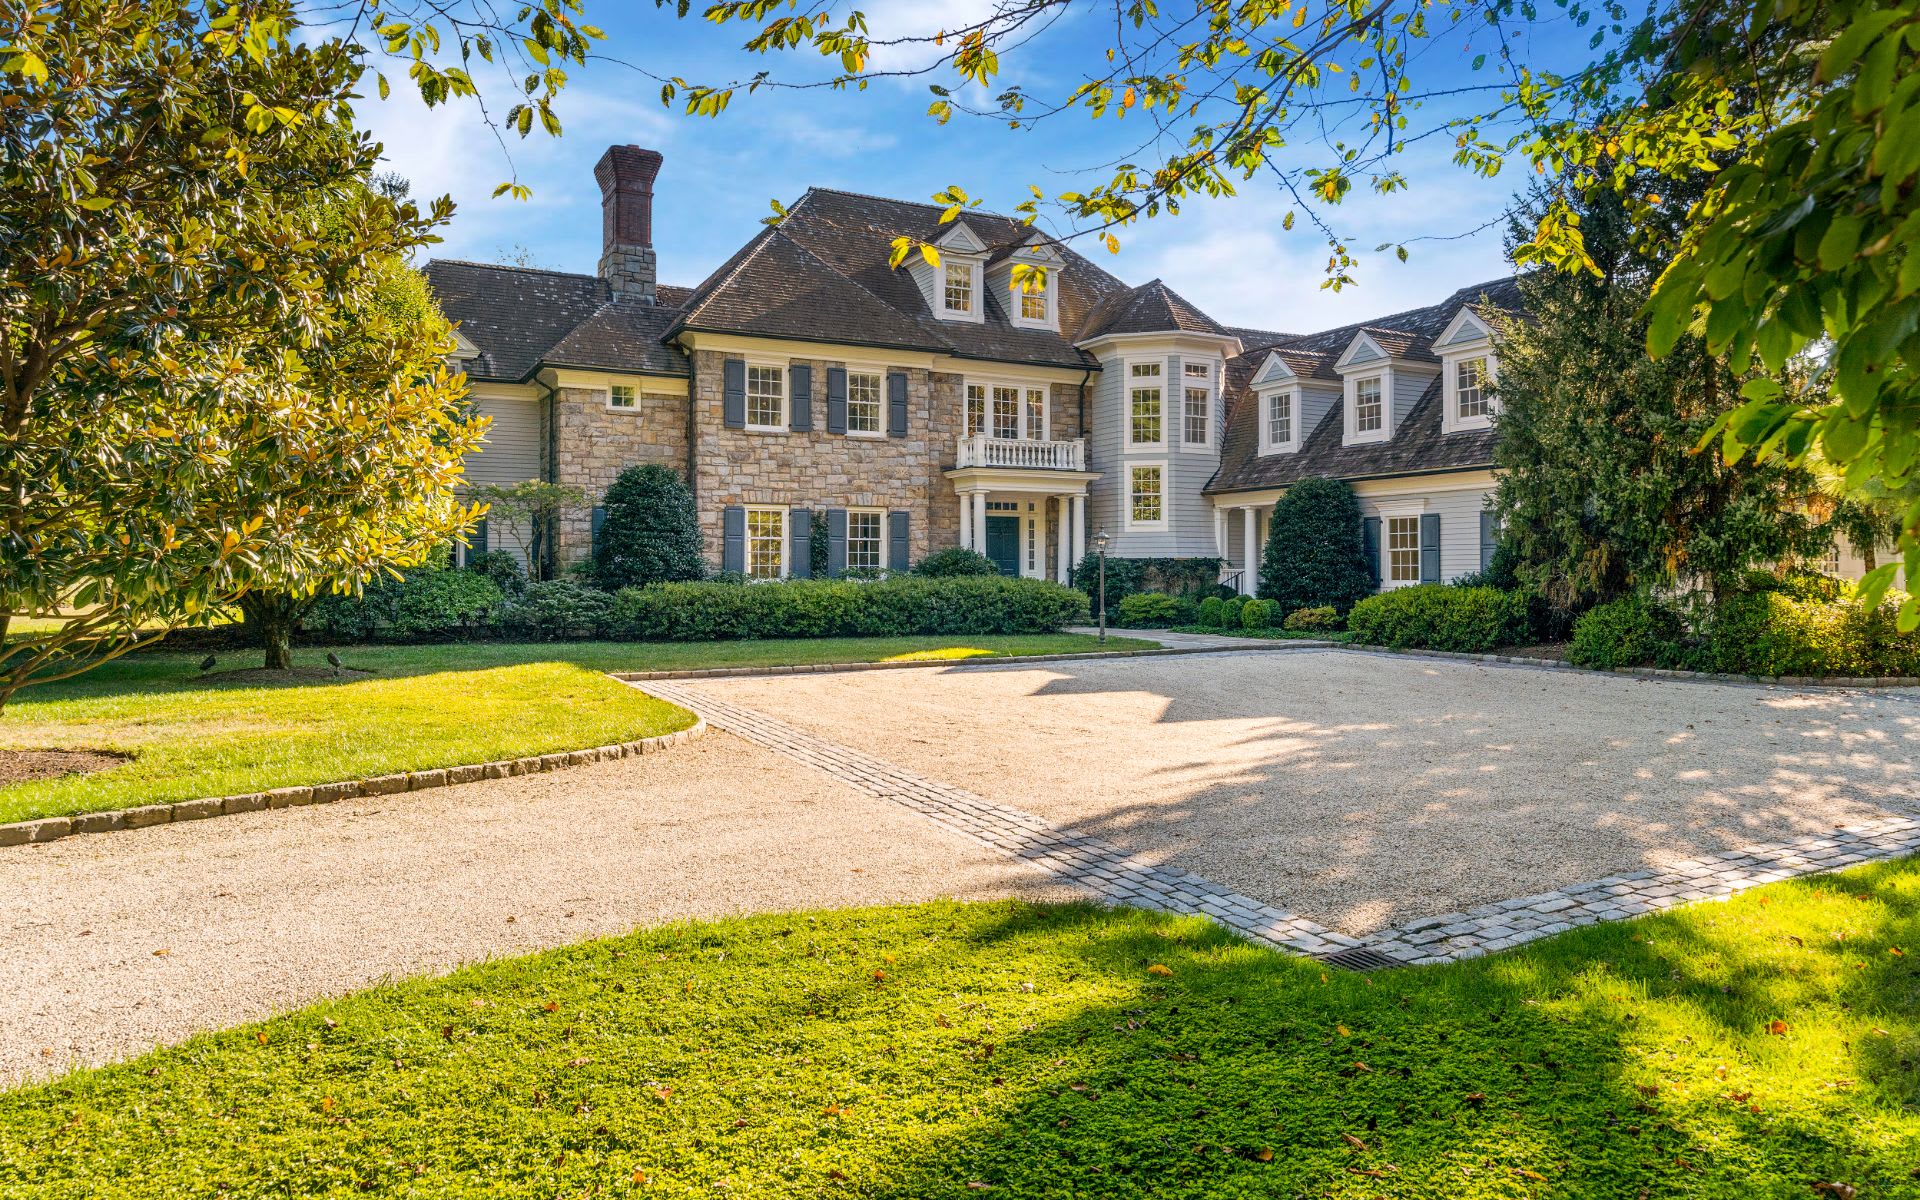 Vince Camuto's Hamptons home sells for $49 million